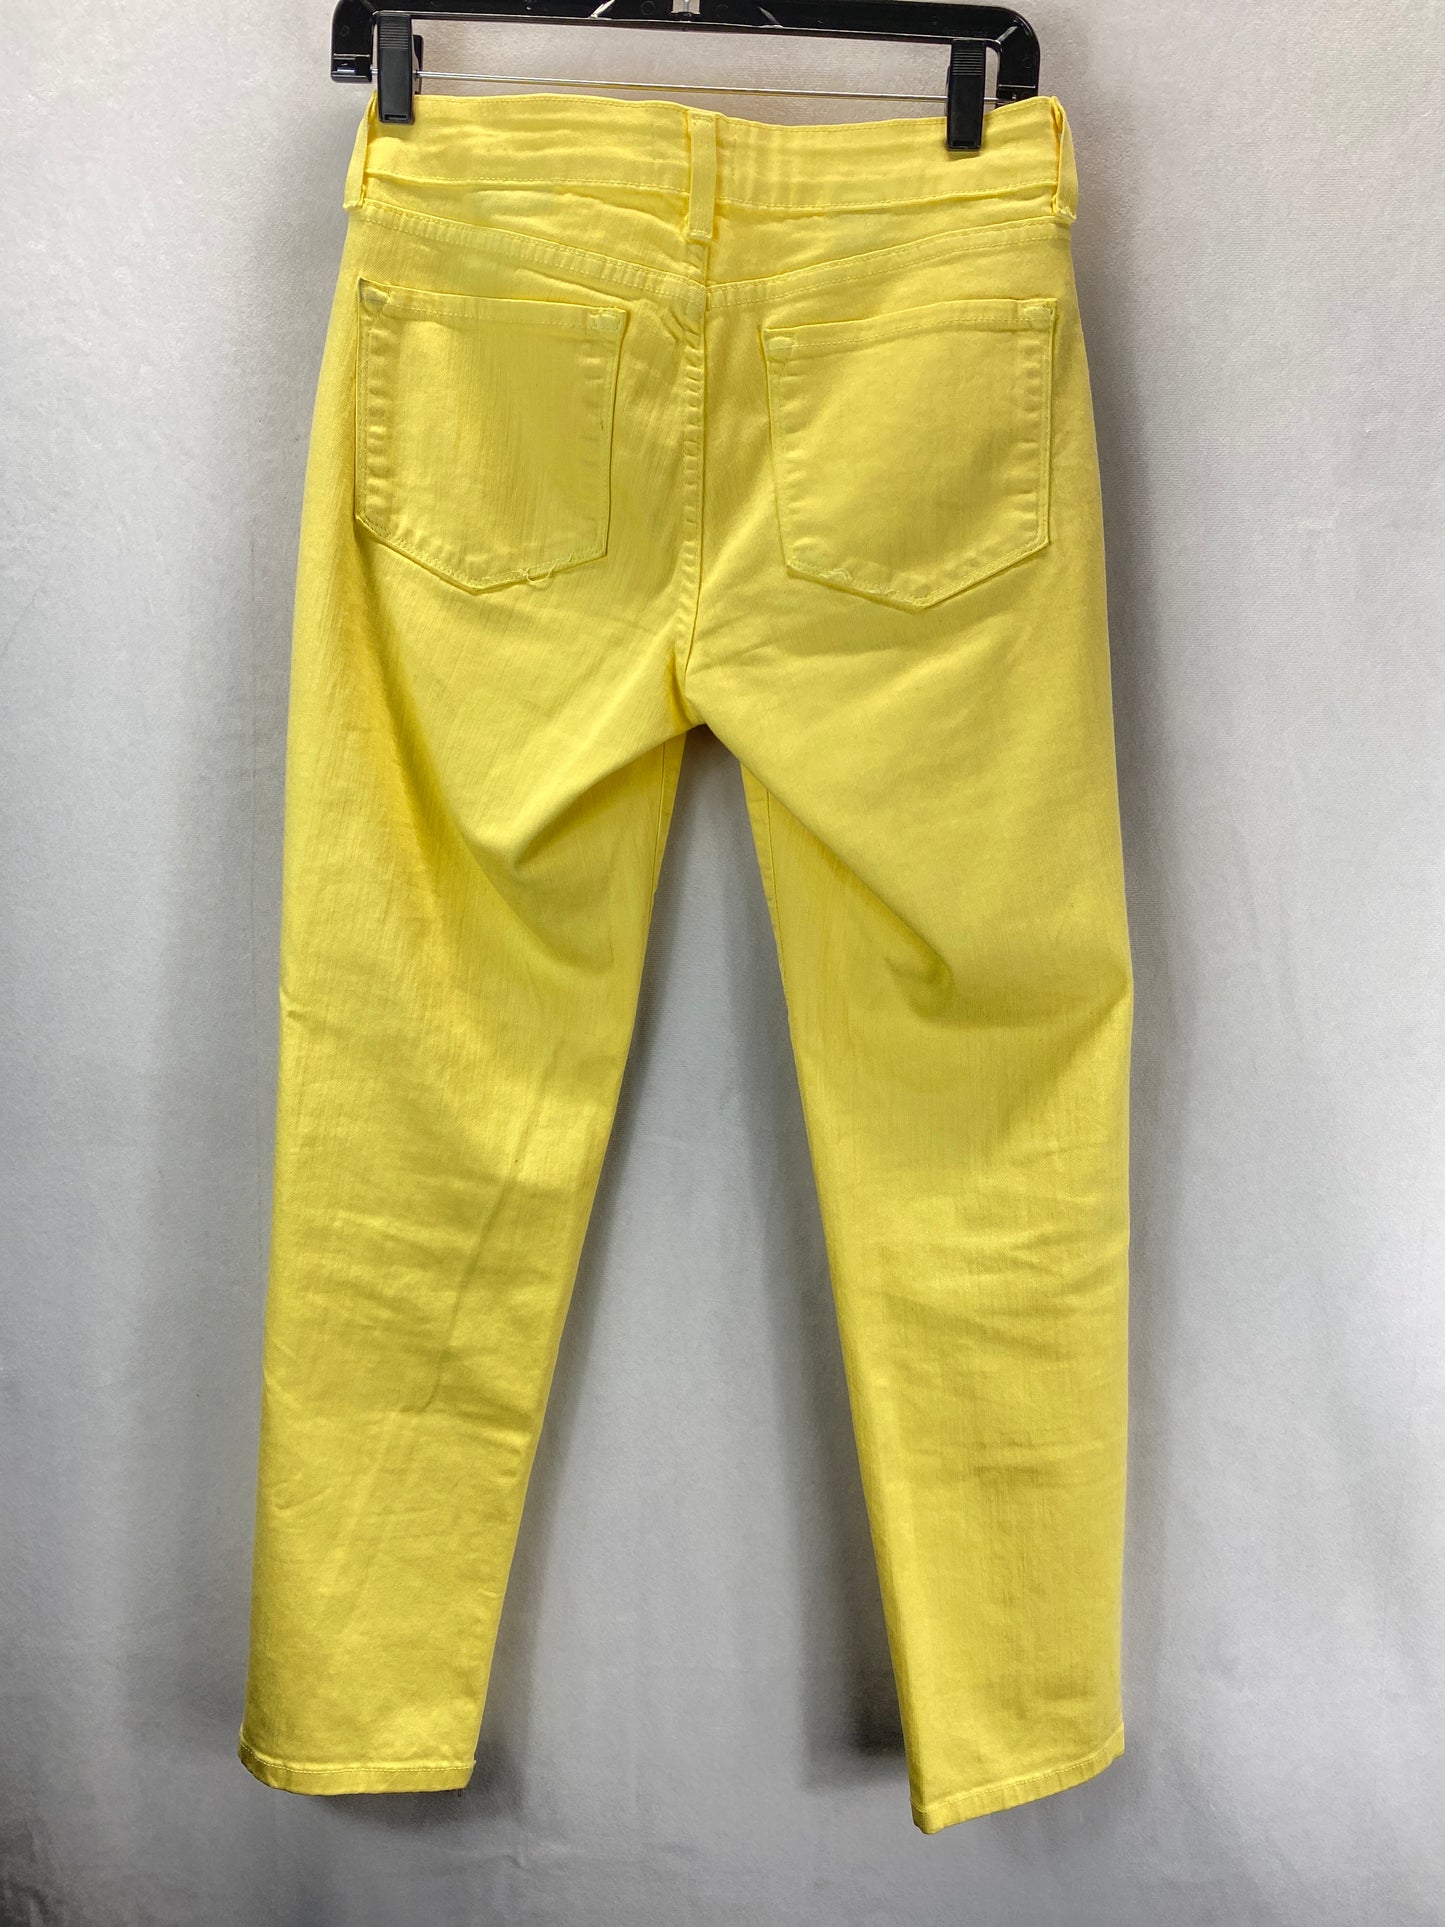 Jeans Designer By Not Your Daughters Jeans  Size: 0